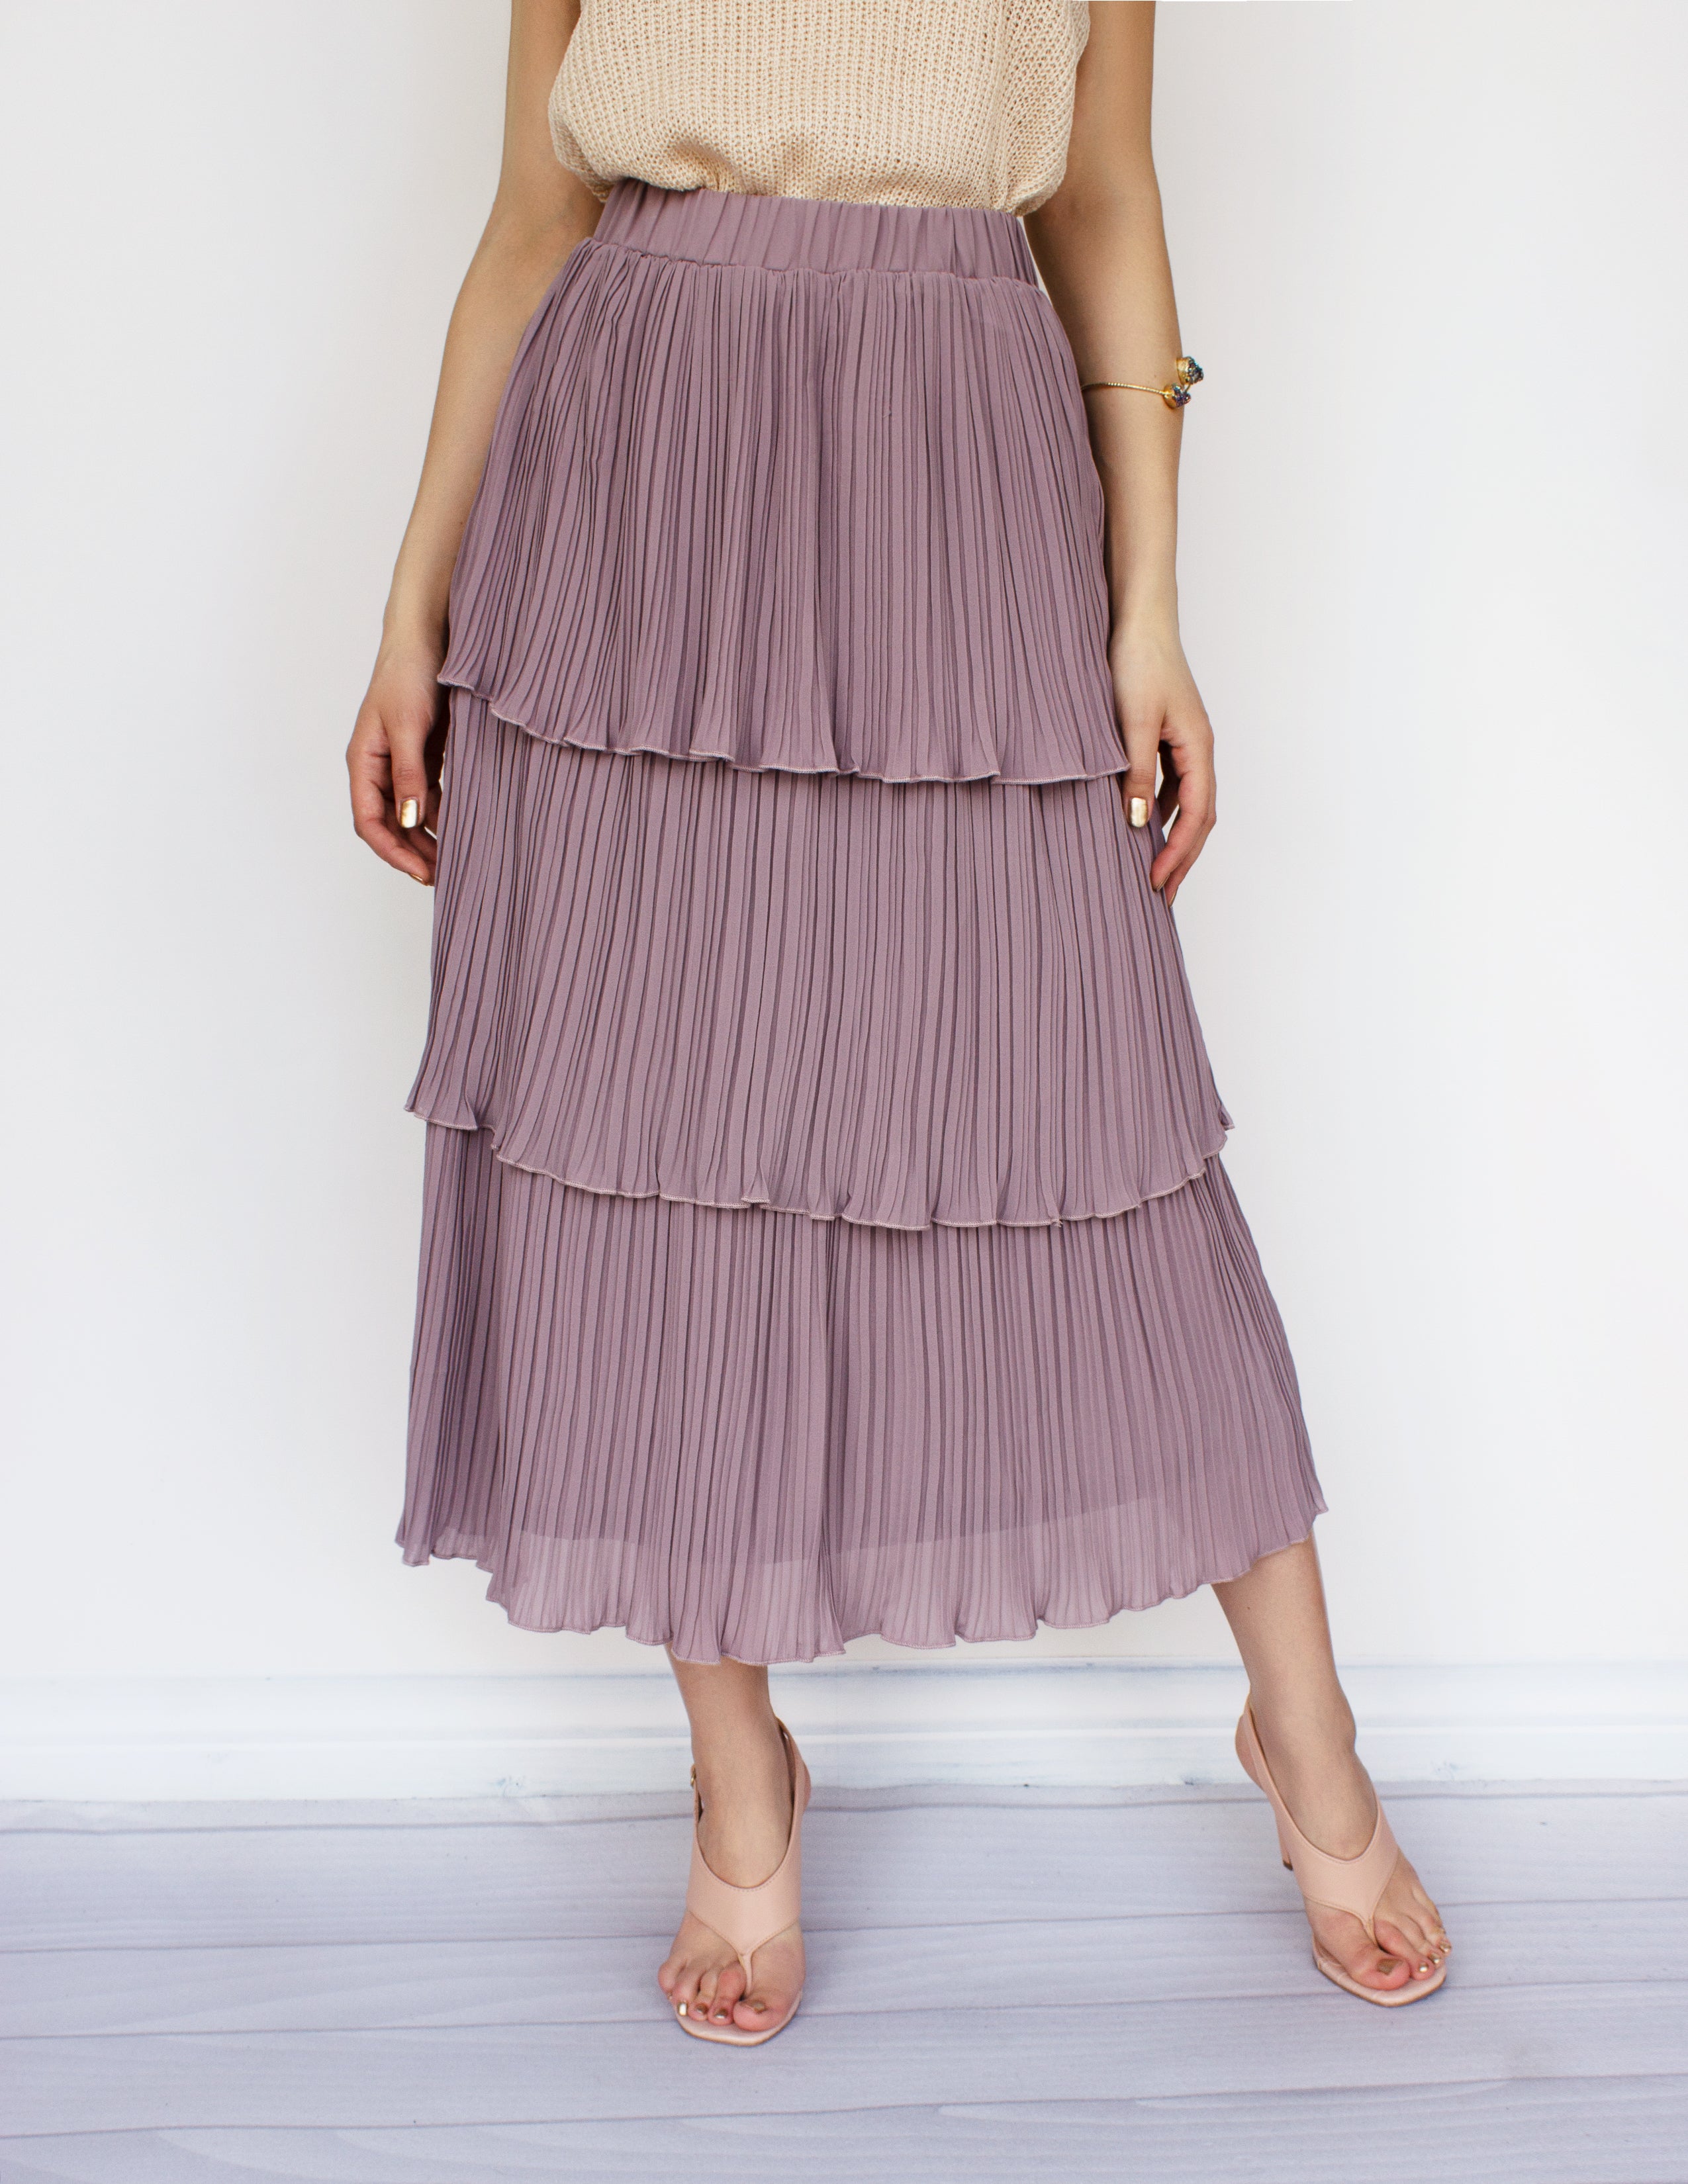 MINUTE SKIRT- LILAC